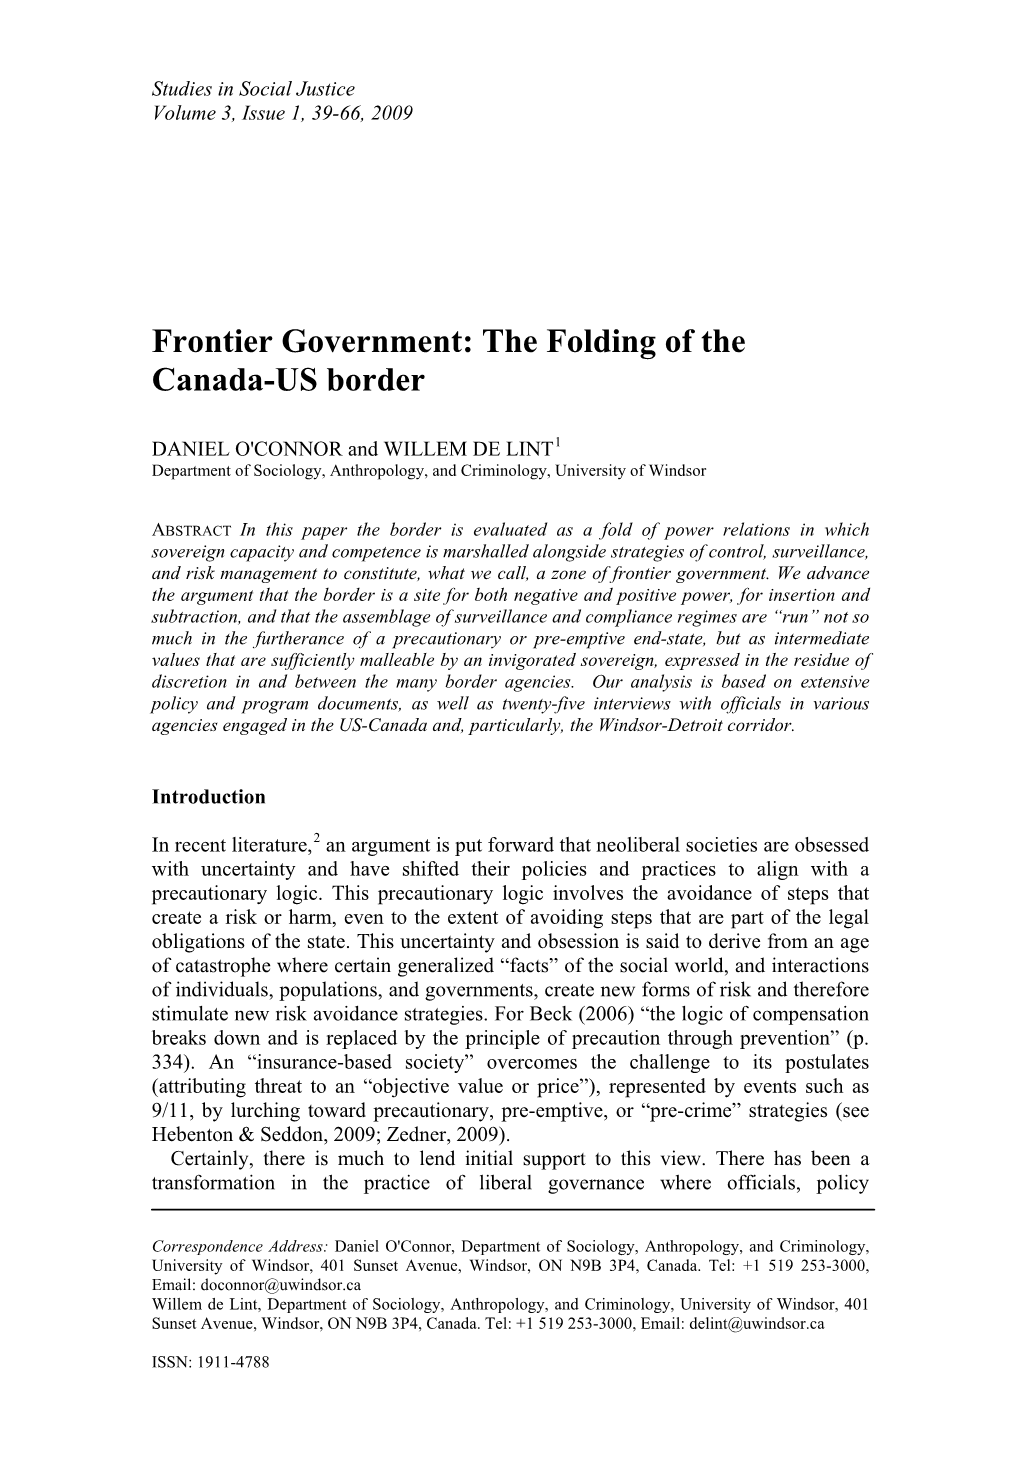 The Folding of the Canada-US Border